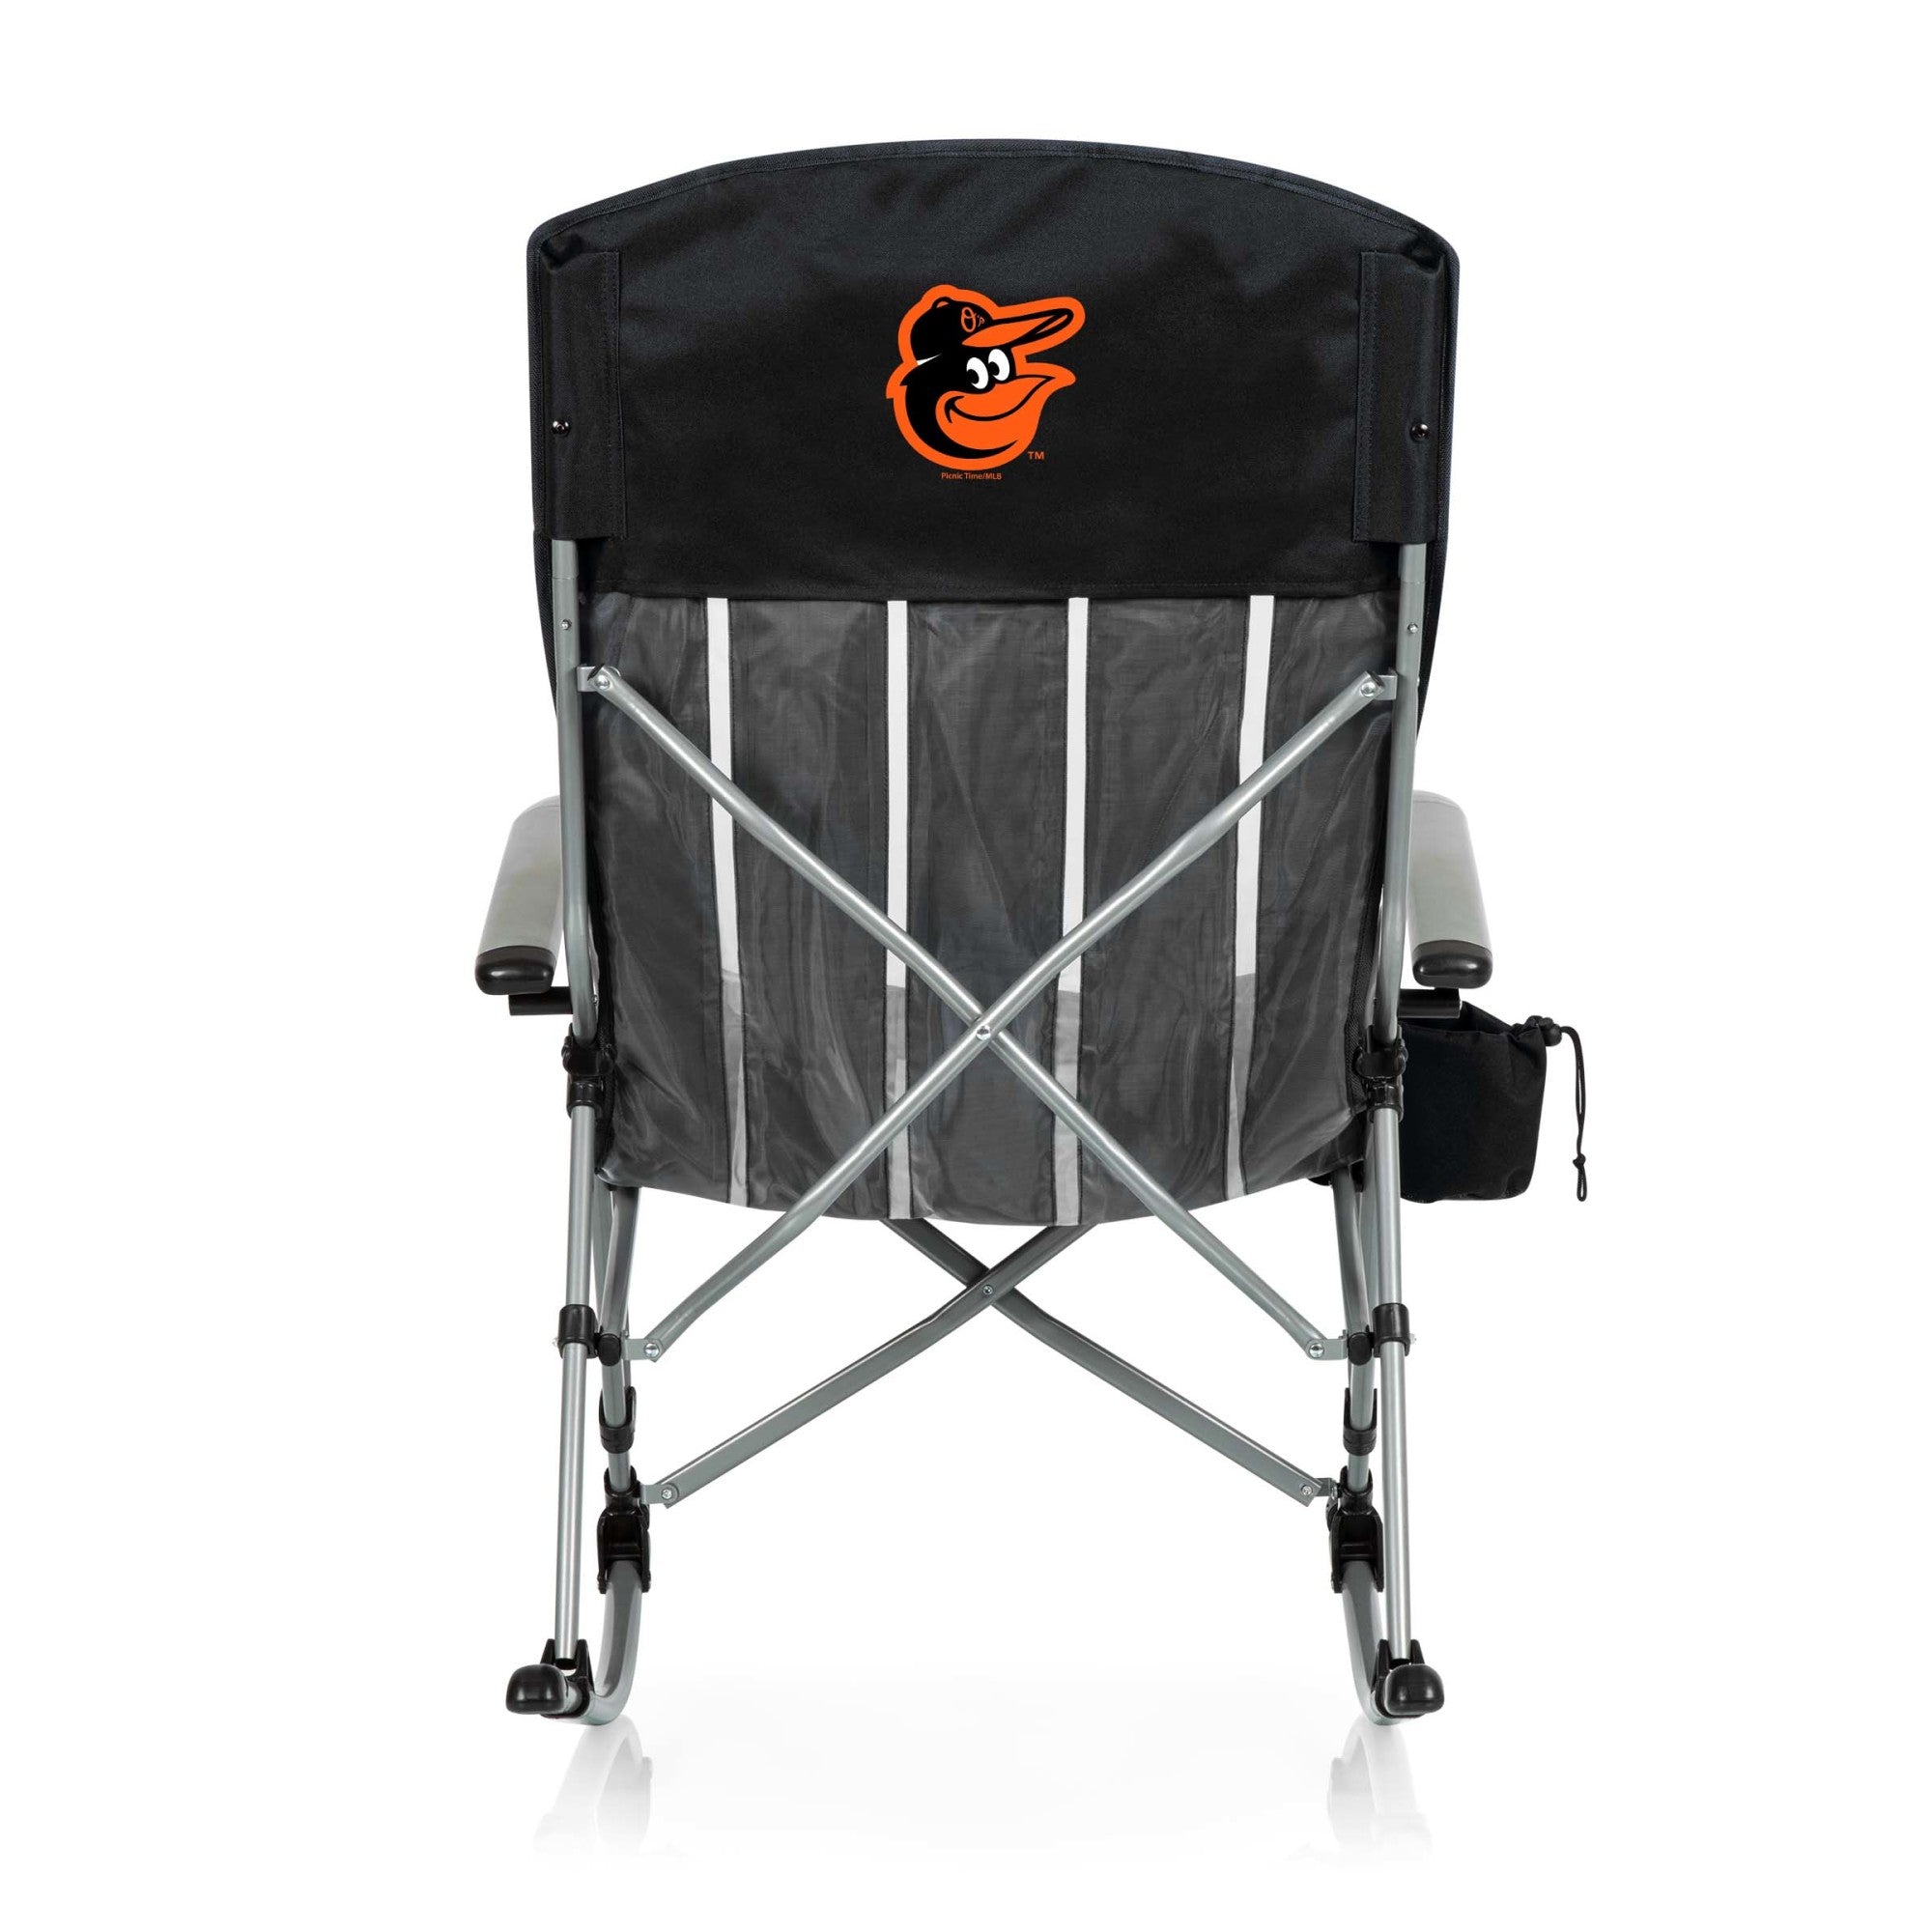 Baltimore Orioles - Outdoor Rocking Camp Chair